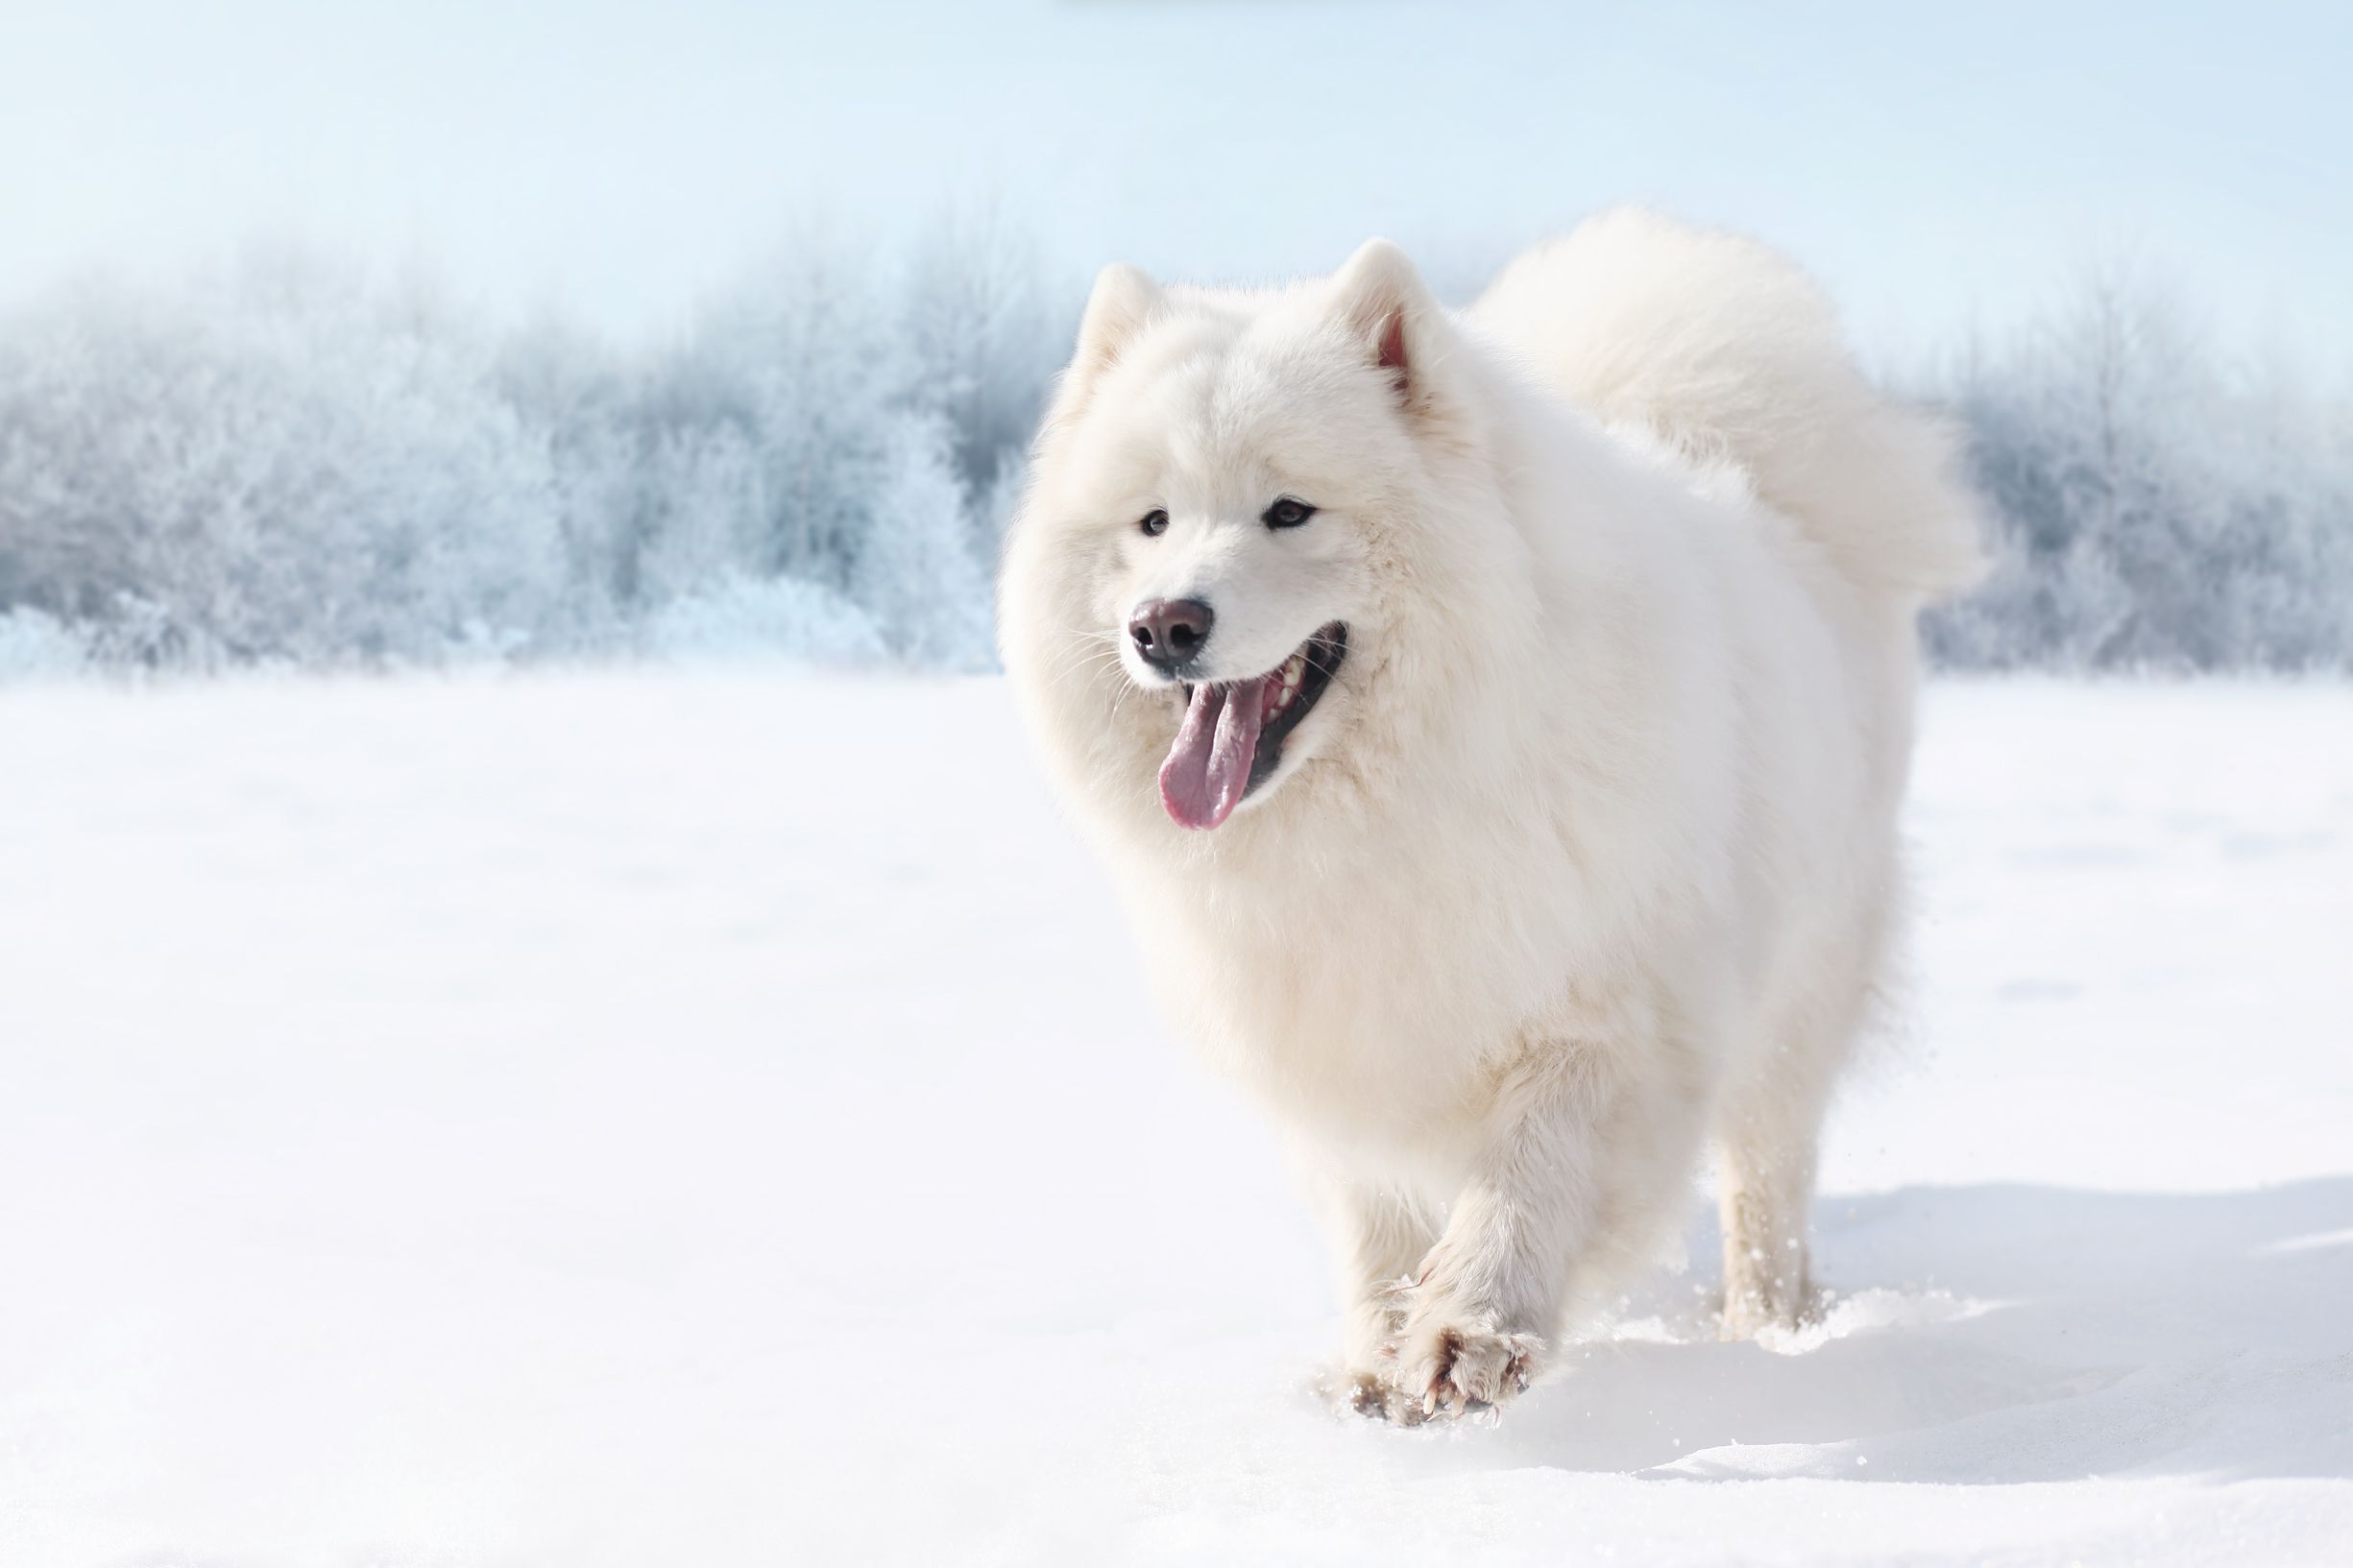 GuasorGettyImages 516978612SAMOYED 37fca139ee5646e7b5aff3cab871f076